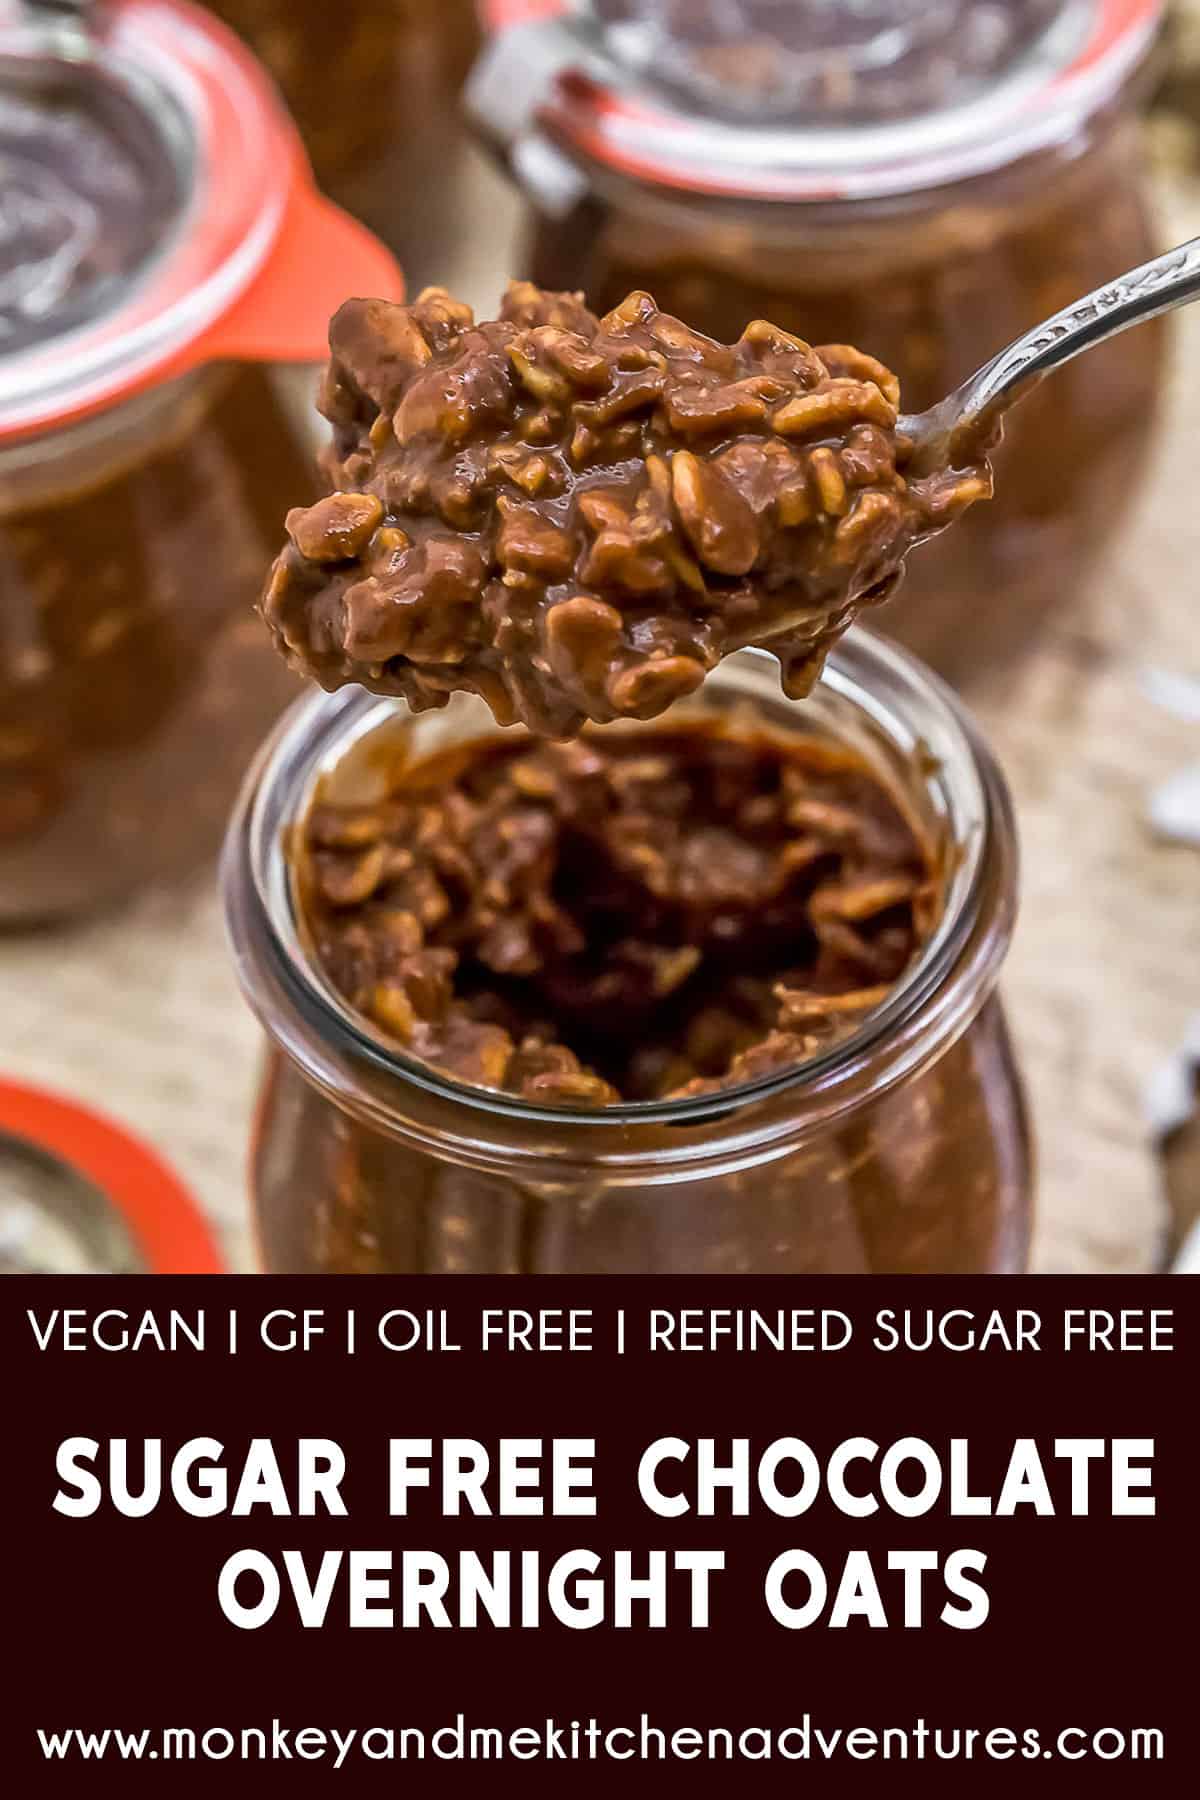 Sugar Free Chocolate Overnight Oats with text description